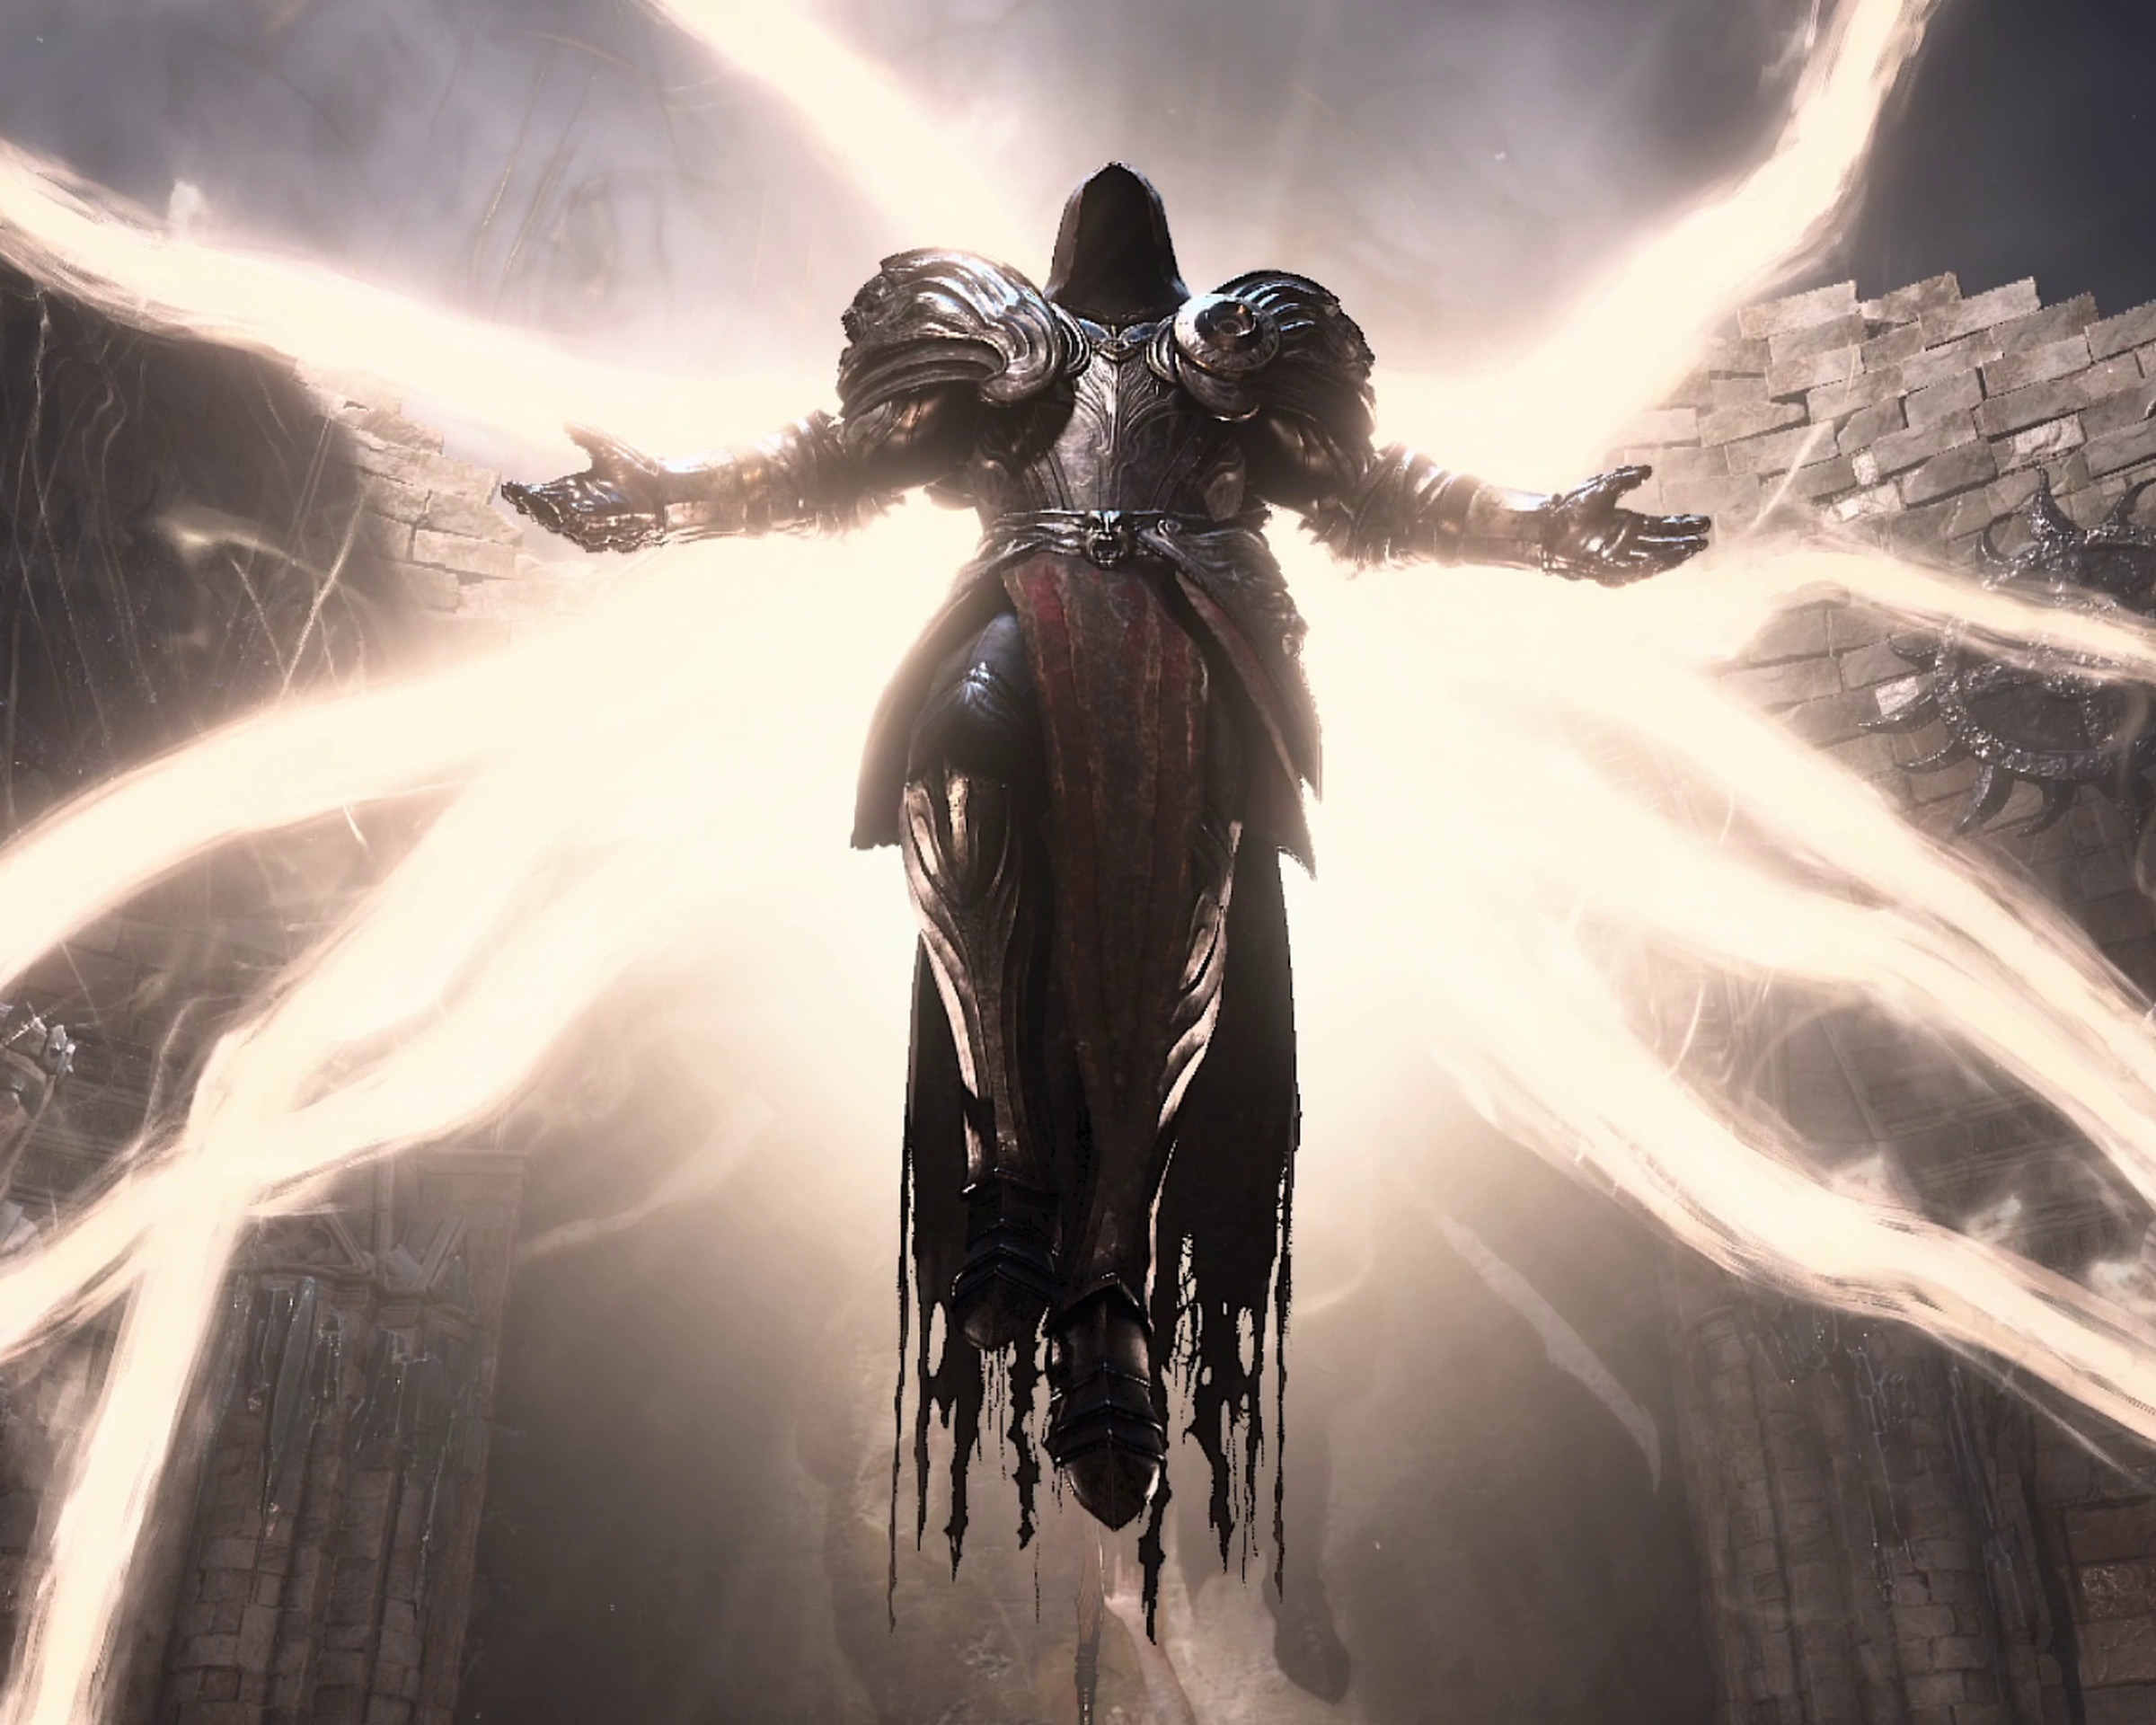 Screenshot from Diablo IV featuring the angel Inarius descending from on high upon wings that are tendrils of light